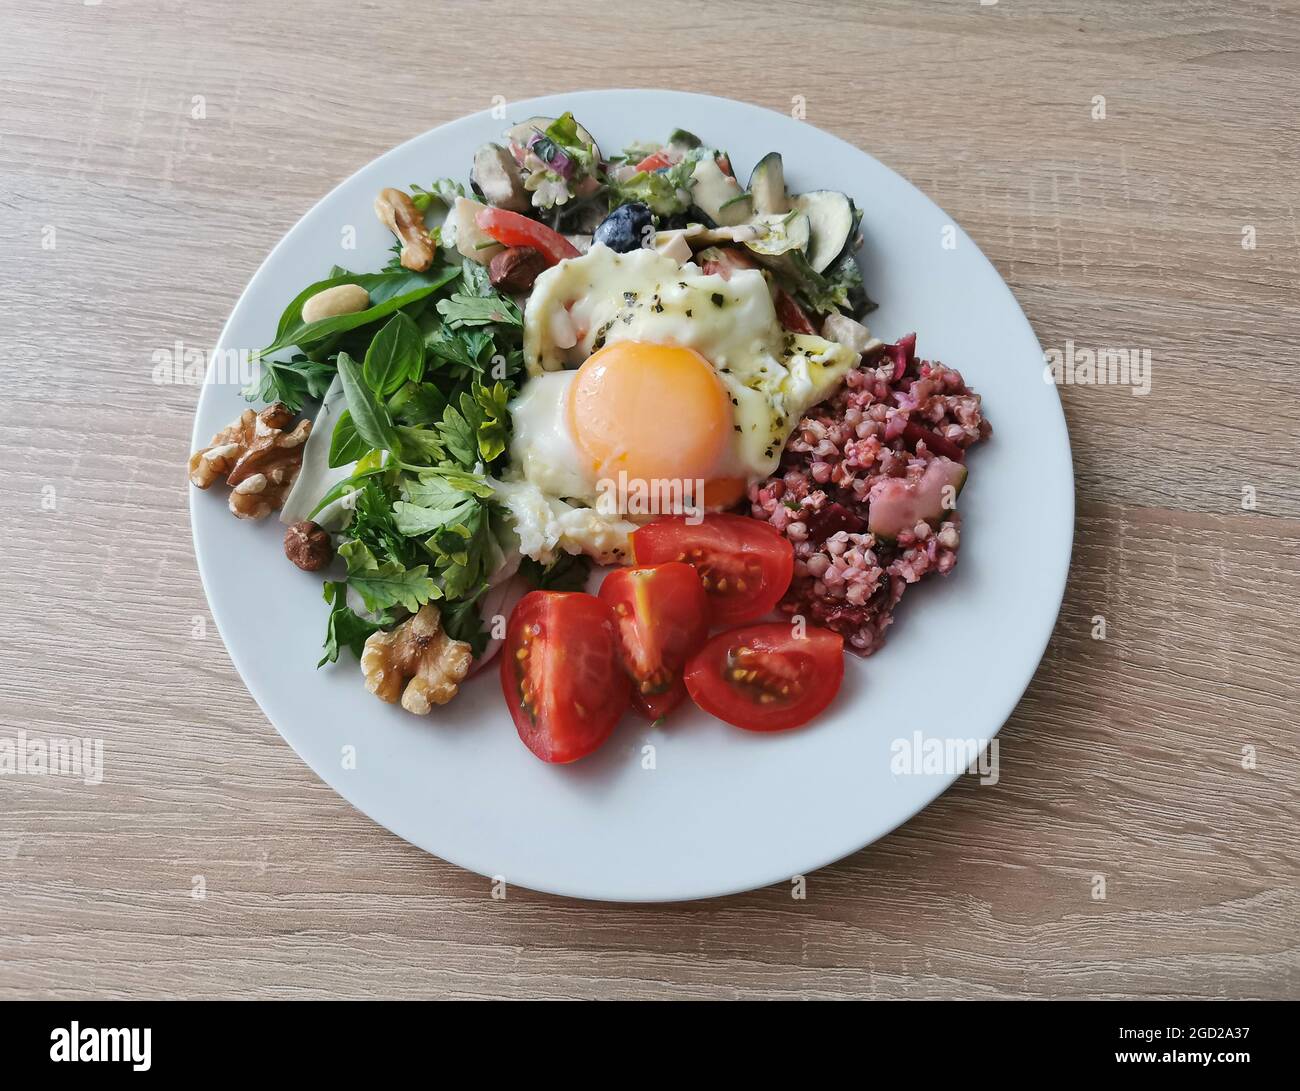 A healthy and tasty summer breakfast. Soft boiled egg, buckwheat groats, colorful vegetables and nuts Stock Photo